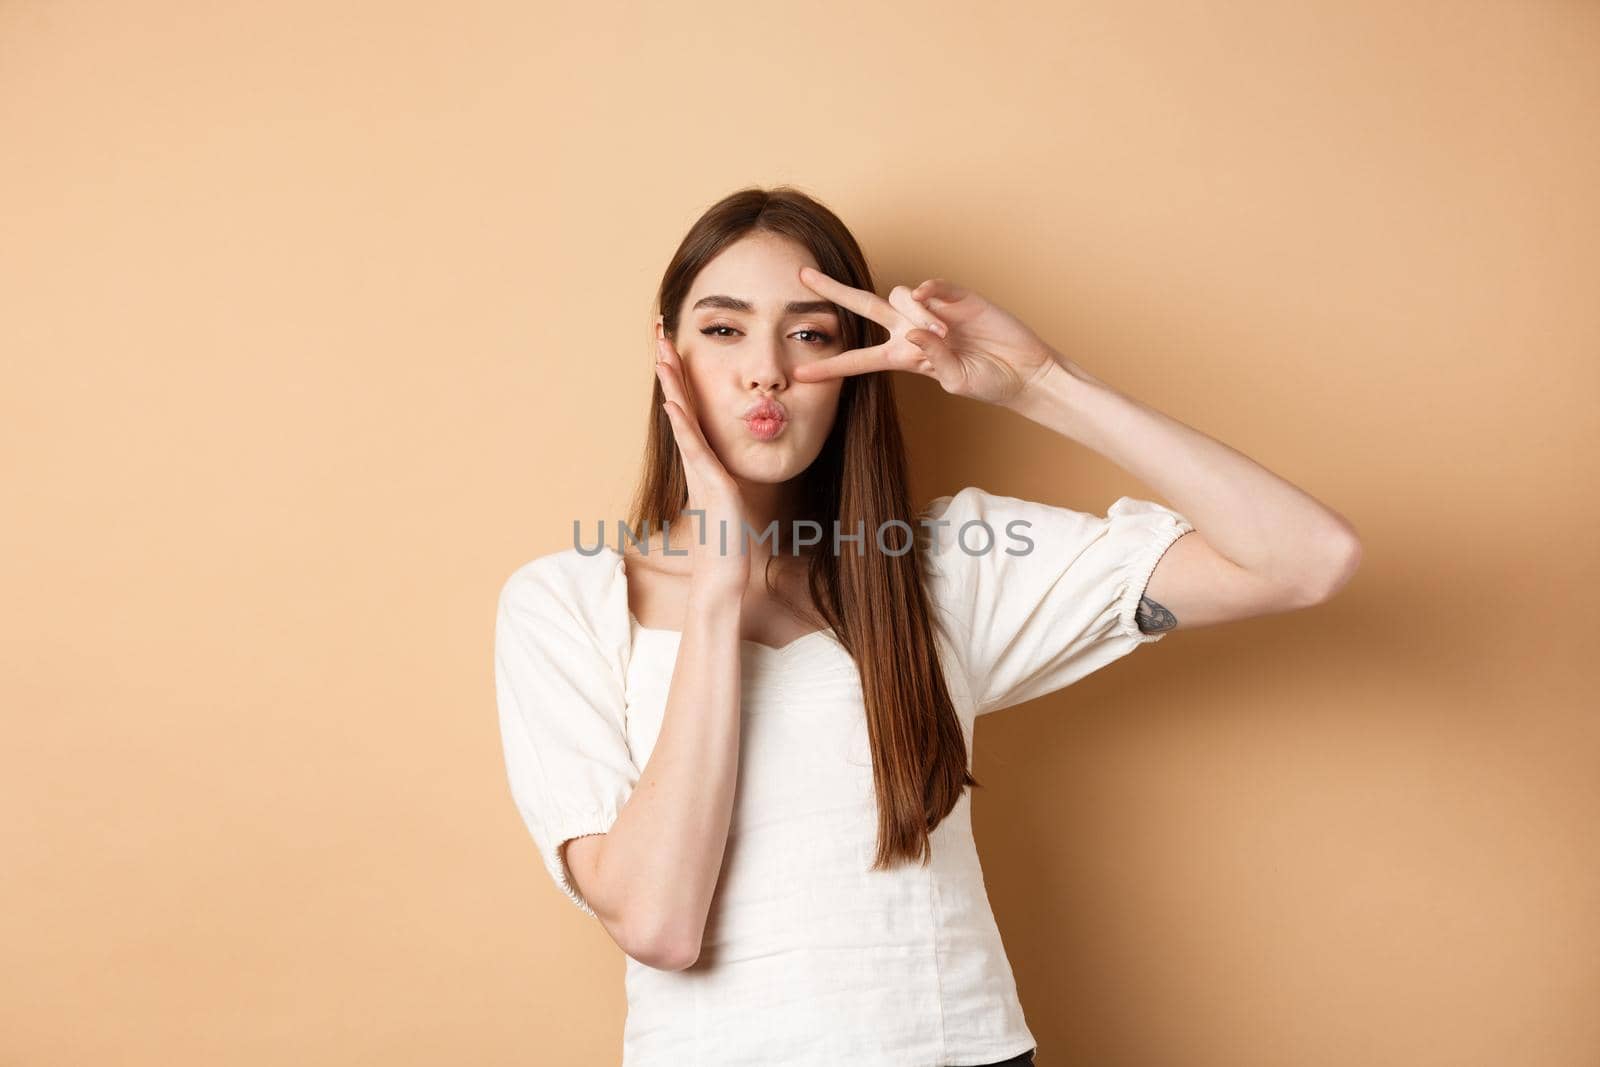 Cute woman showing v-sign and pucker lips for kiss, touching face with silly expression, standing on beige background.